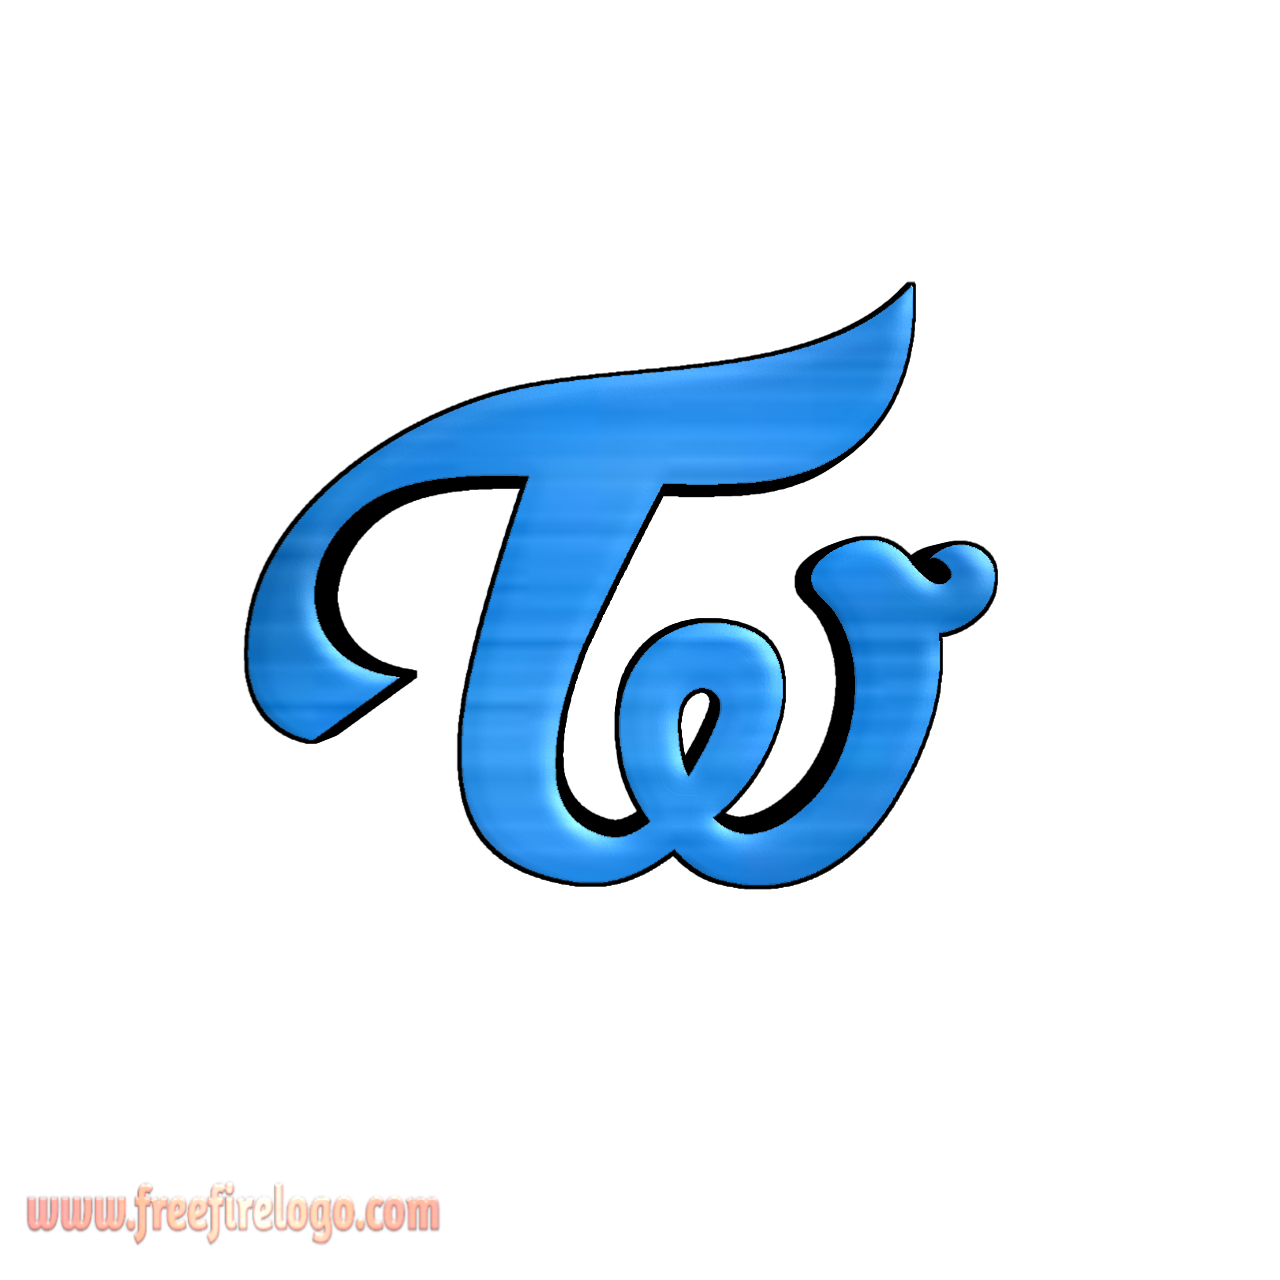 Twice Logo Png Jpg Free Download Without Copyright Use